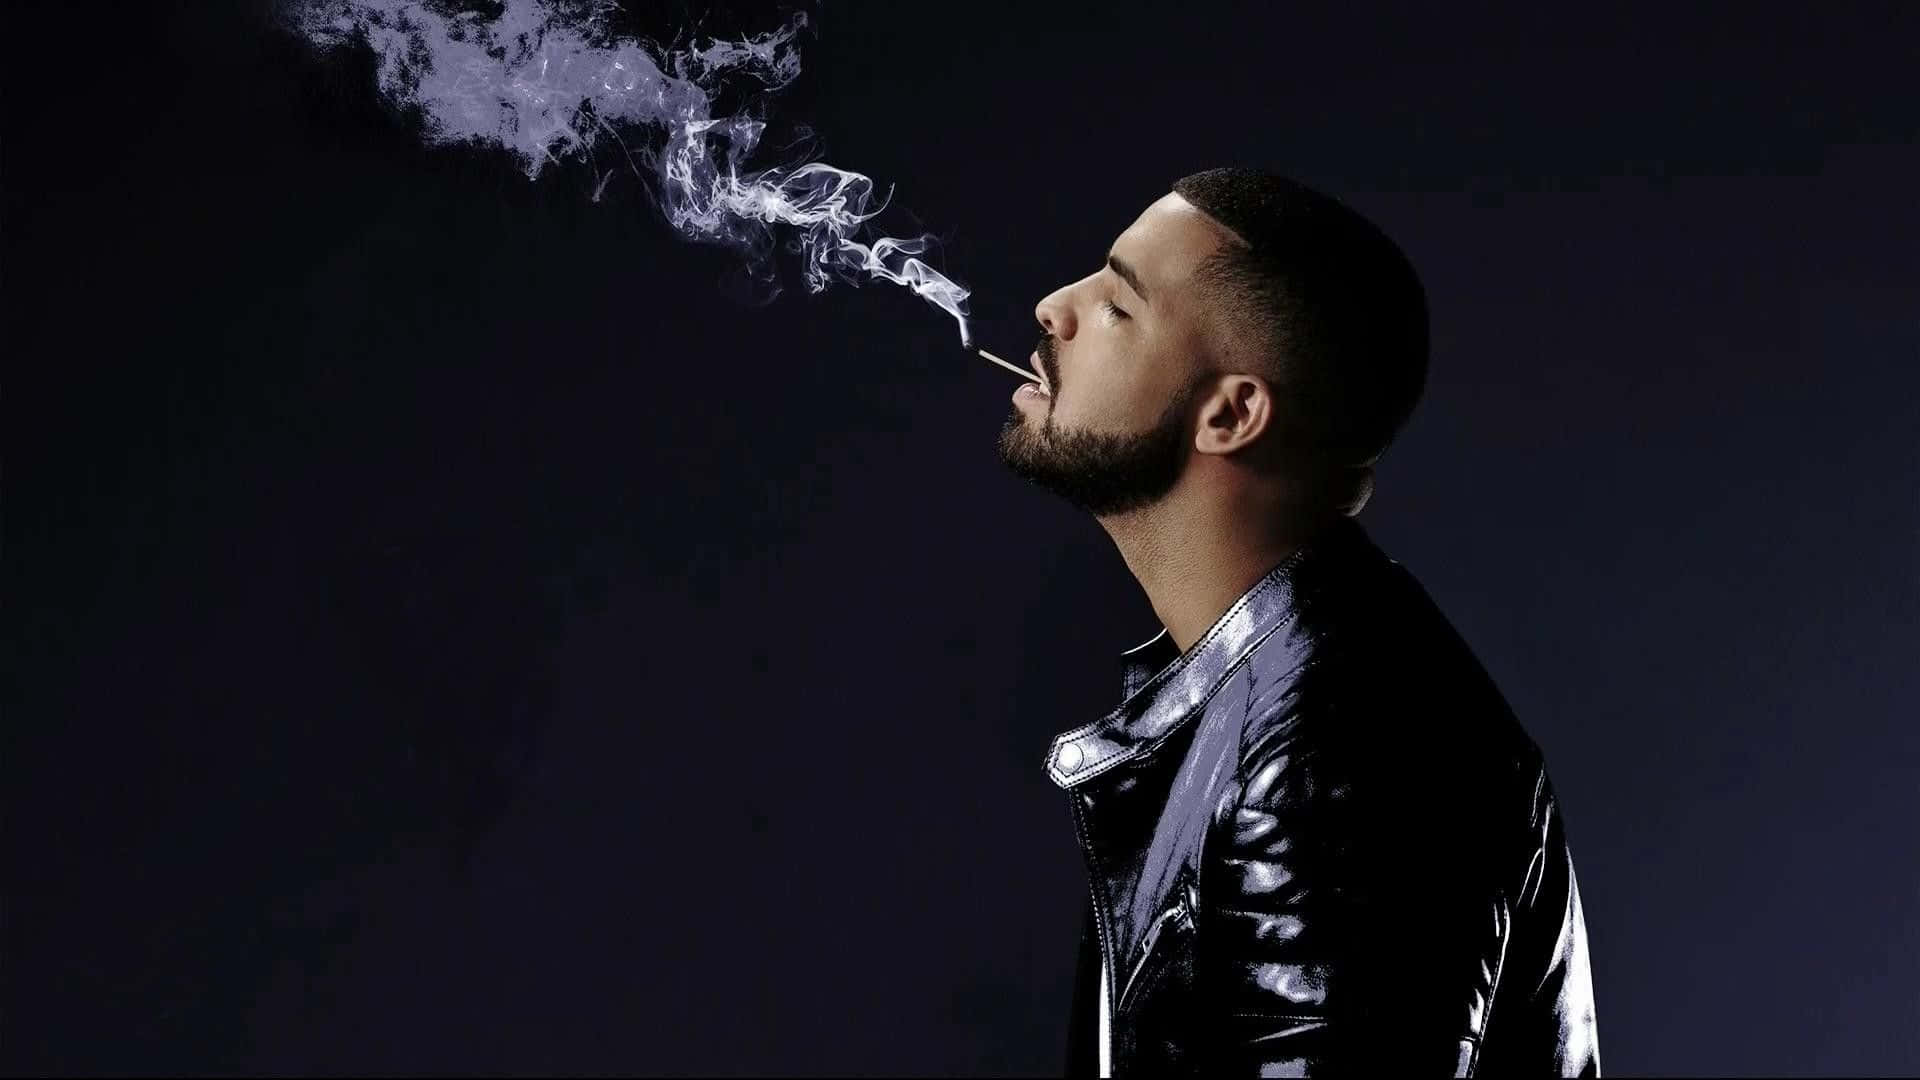 "Drake's rise to the top" Wallpaper